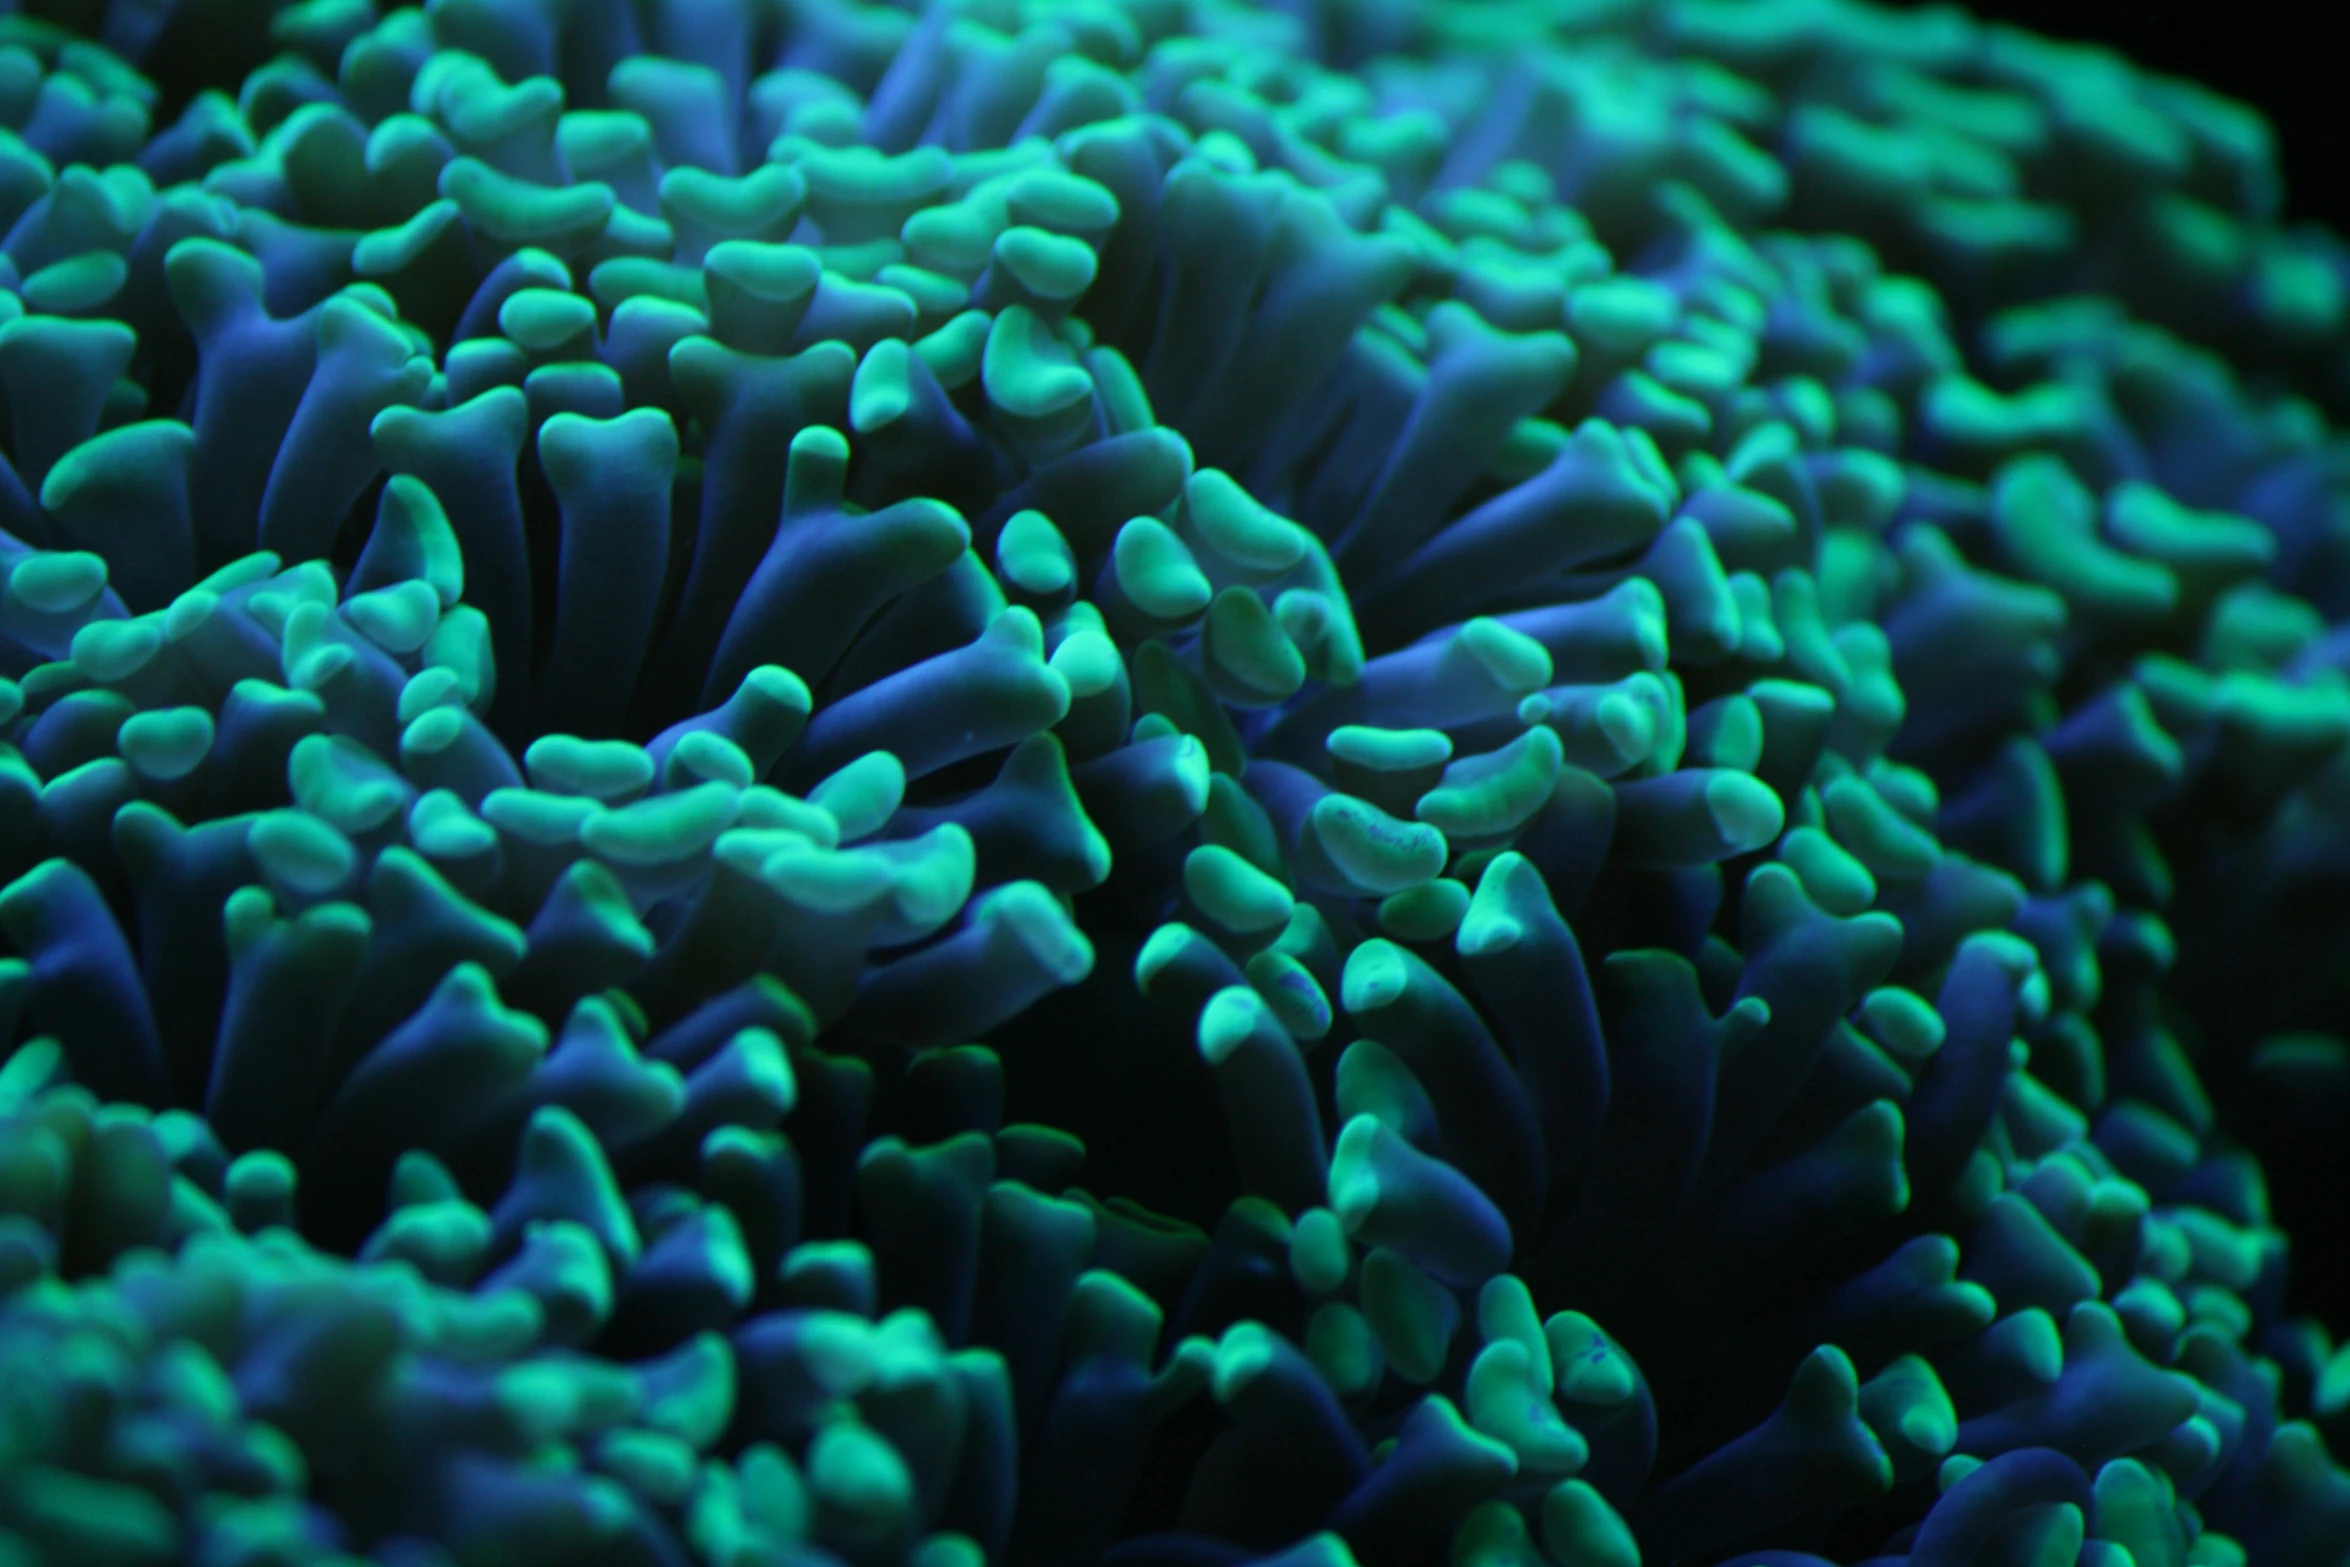 a large coral with multiple blue and green bubbles